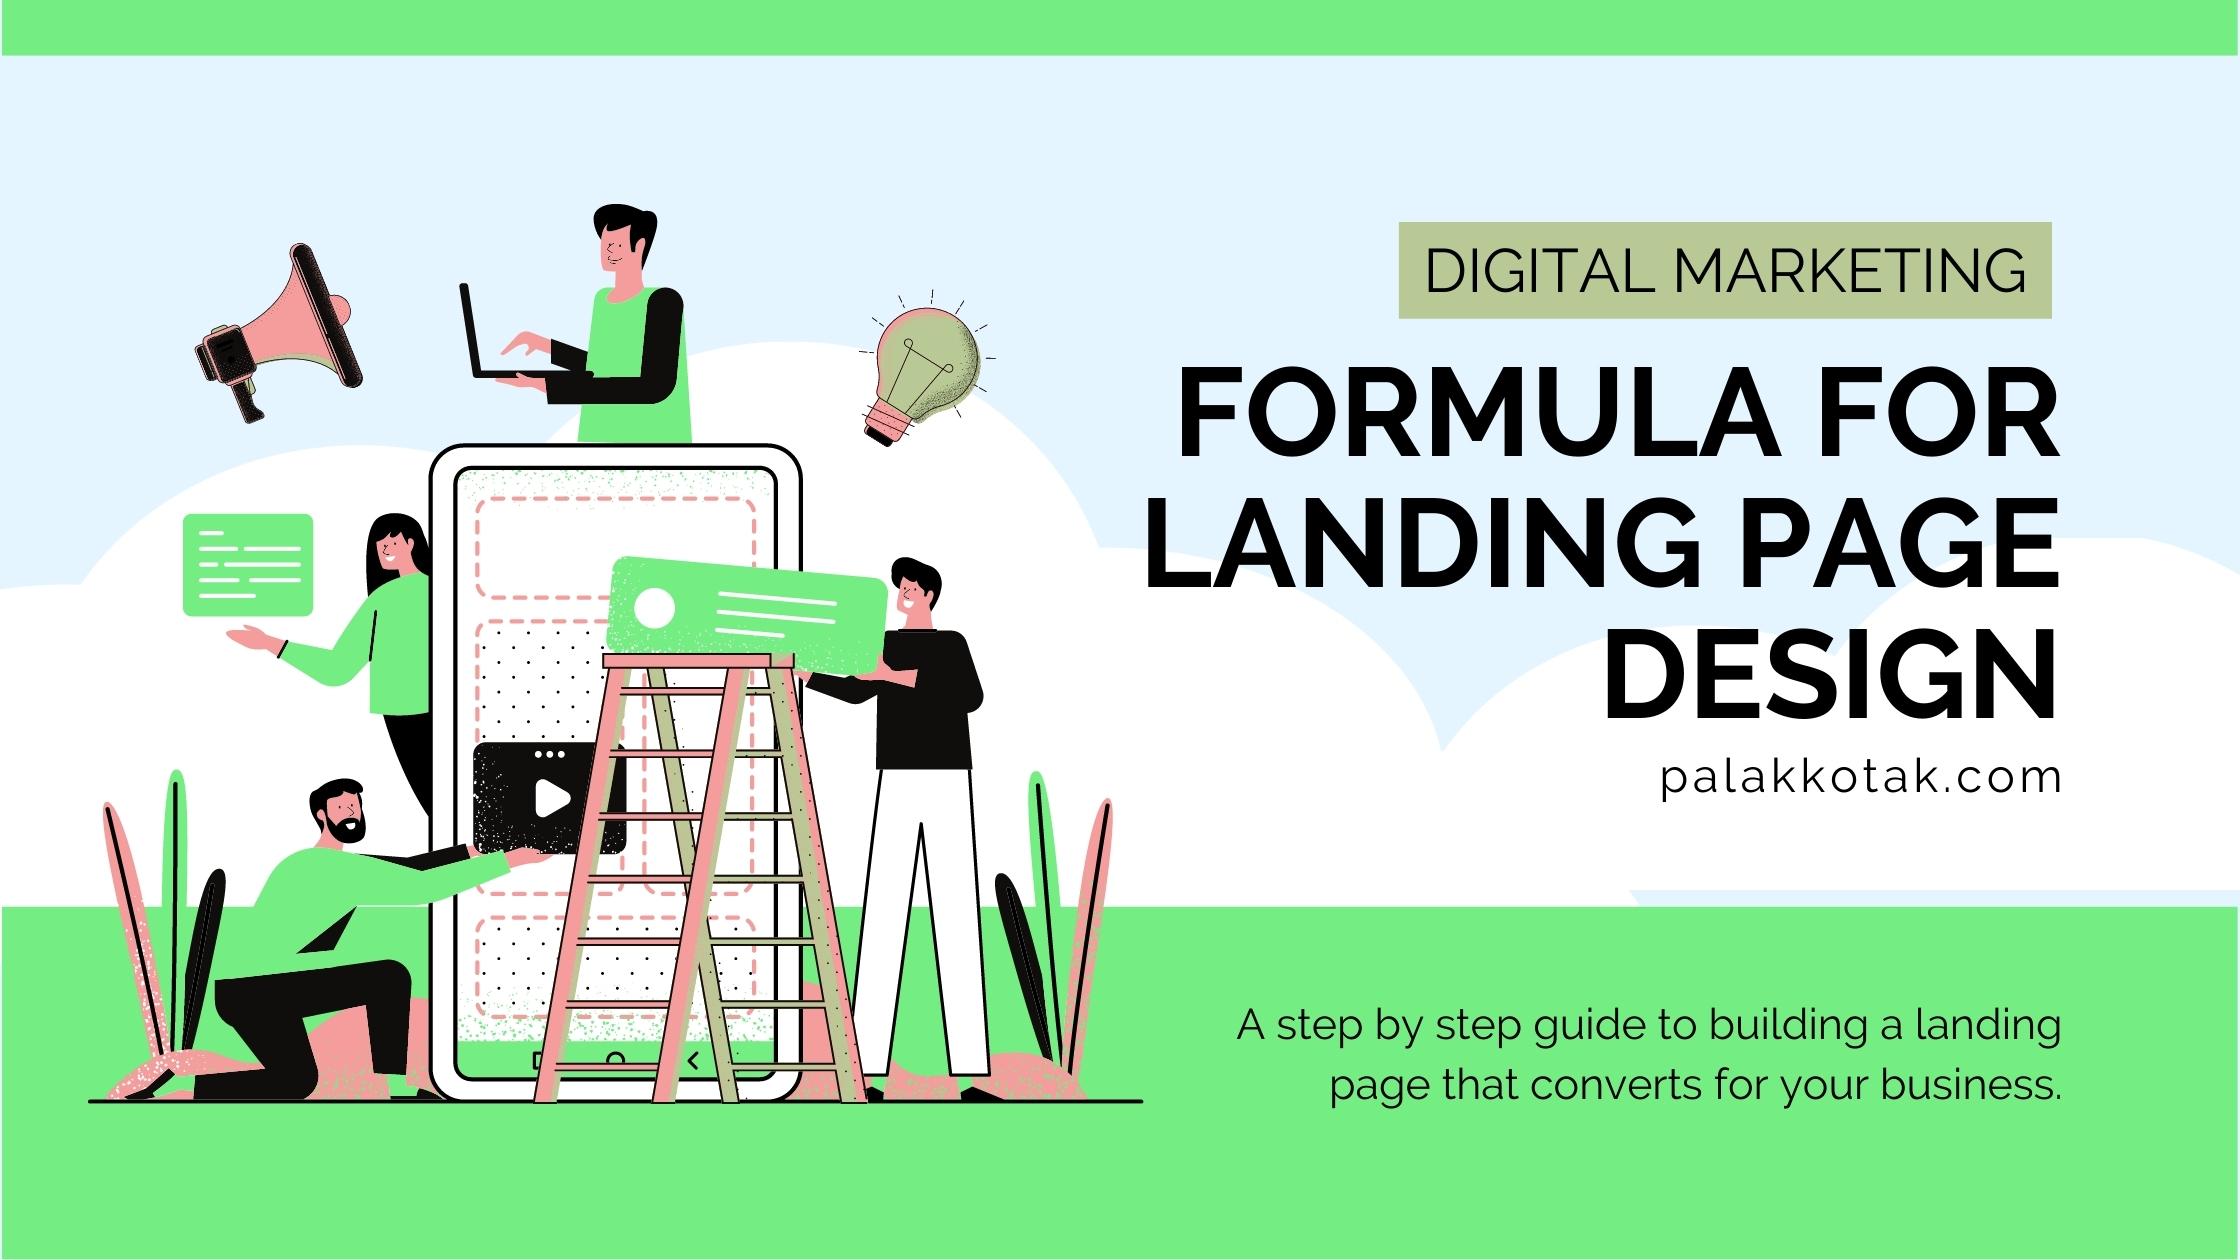 The formula for Landing Page Design: A step-by-step guide to building a landing page that converts for your business.